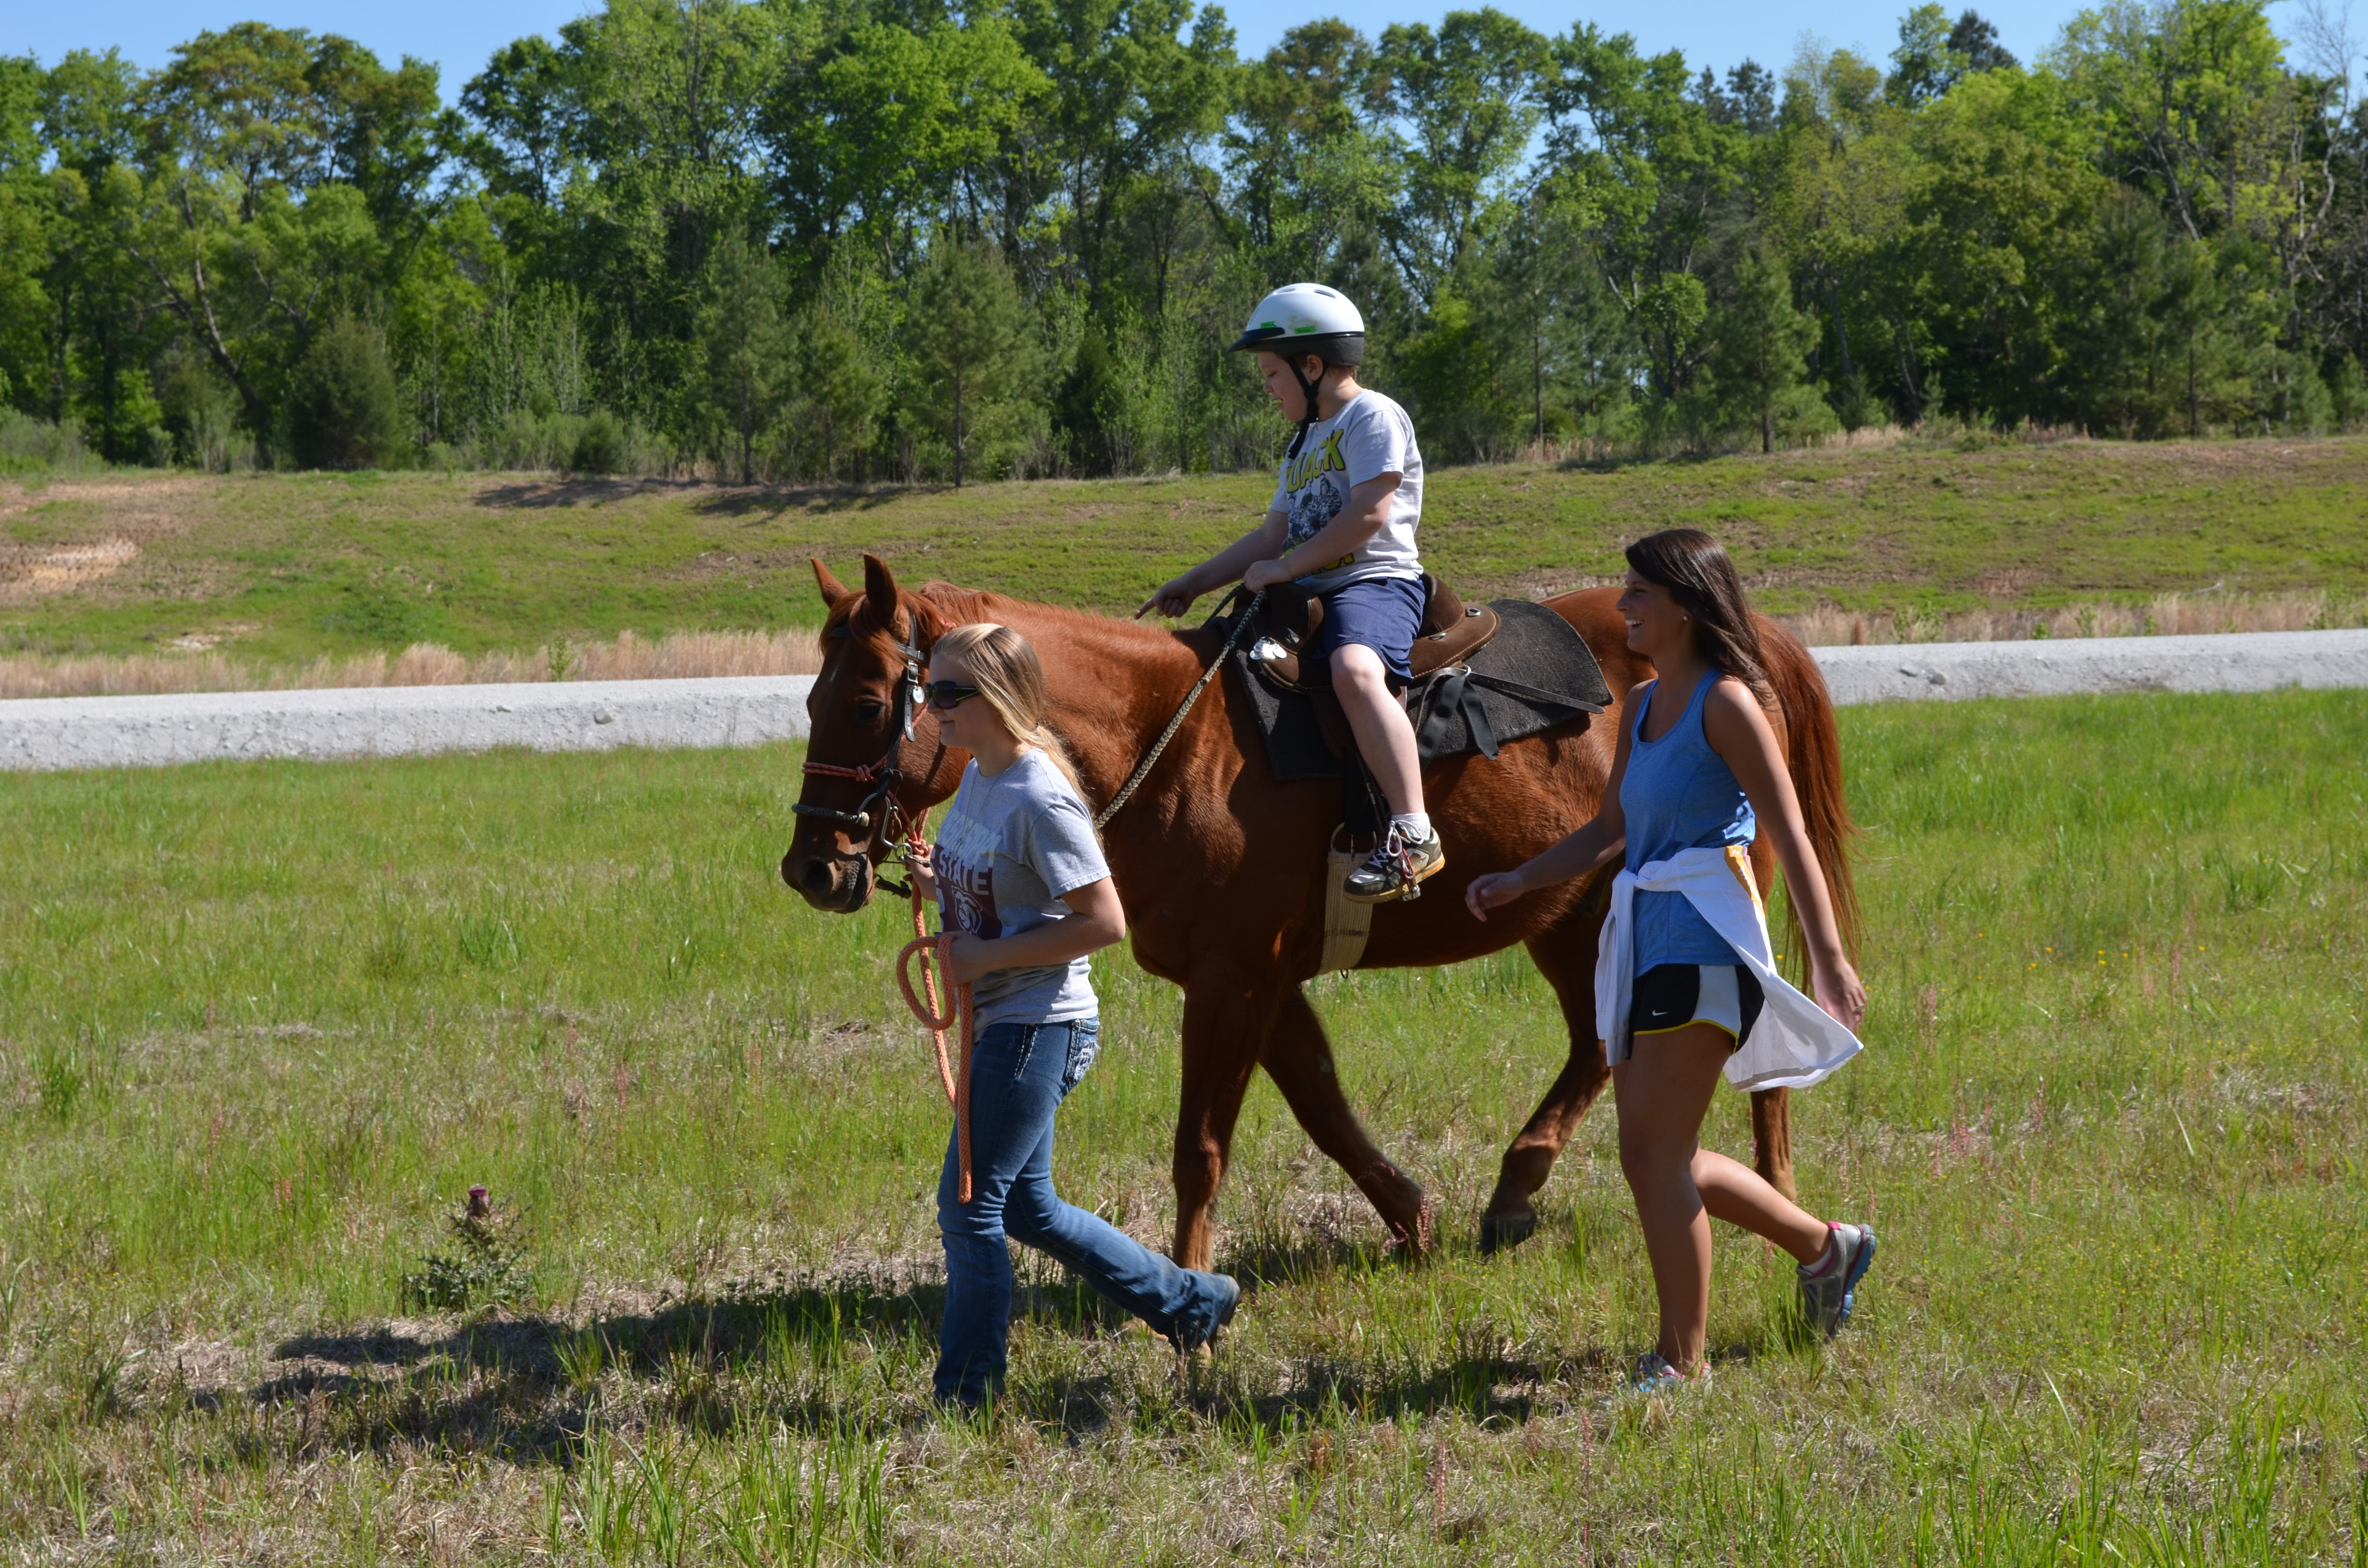 <br /><br />
The accredited therapeutic riding program at Mississippi State University serves special needs riders to increase physical, cognitive and communication skills. 